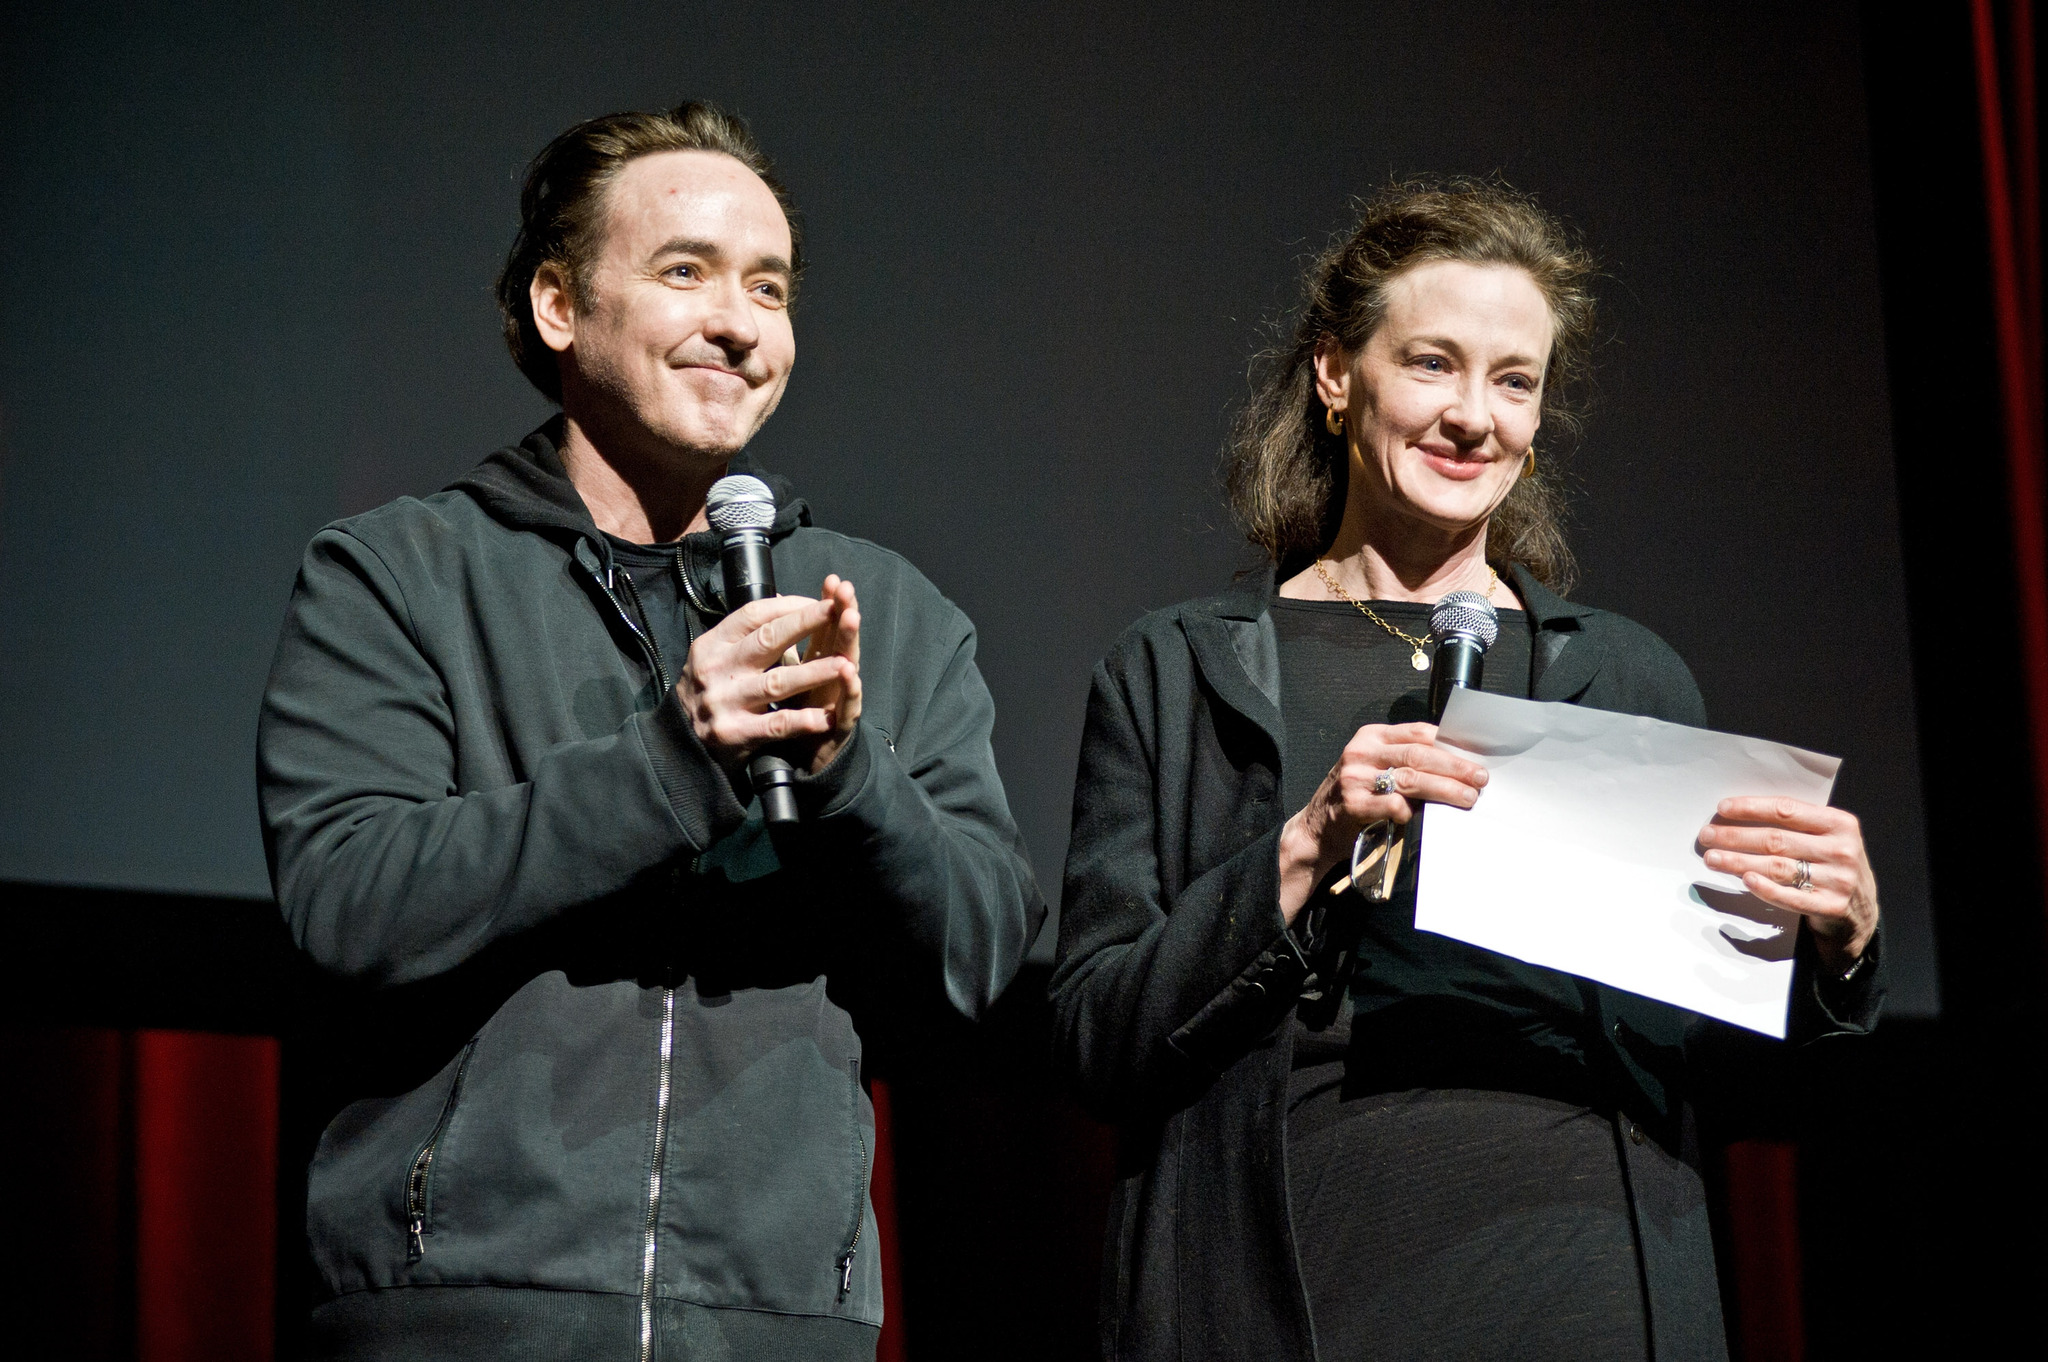 John and Joan Cusack attend the Roger Ebert Memorial Tribute at Chicago Theatre on April 11, 2013 in Chicago, Illinois.